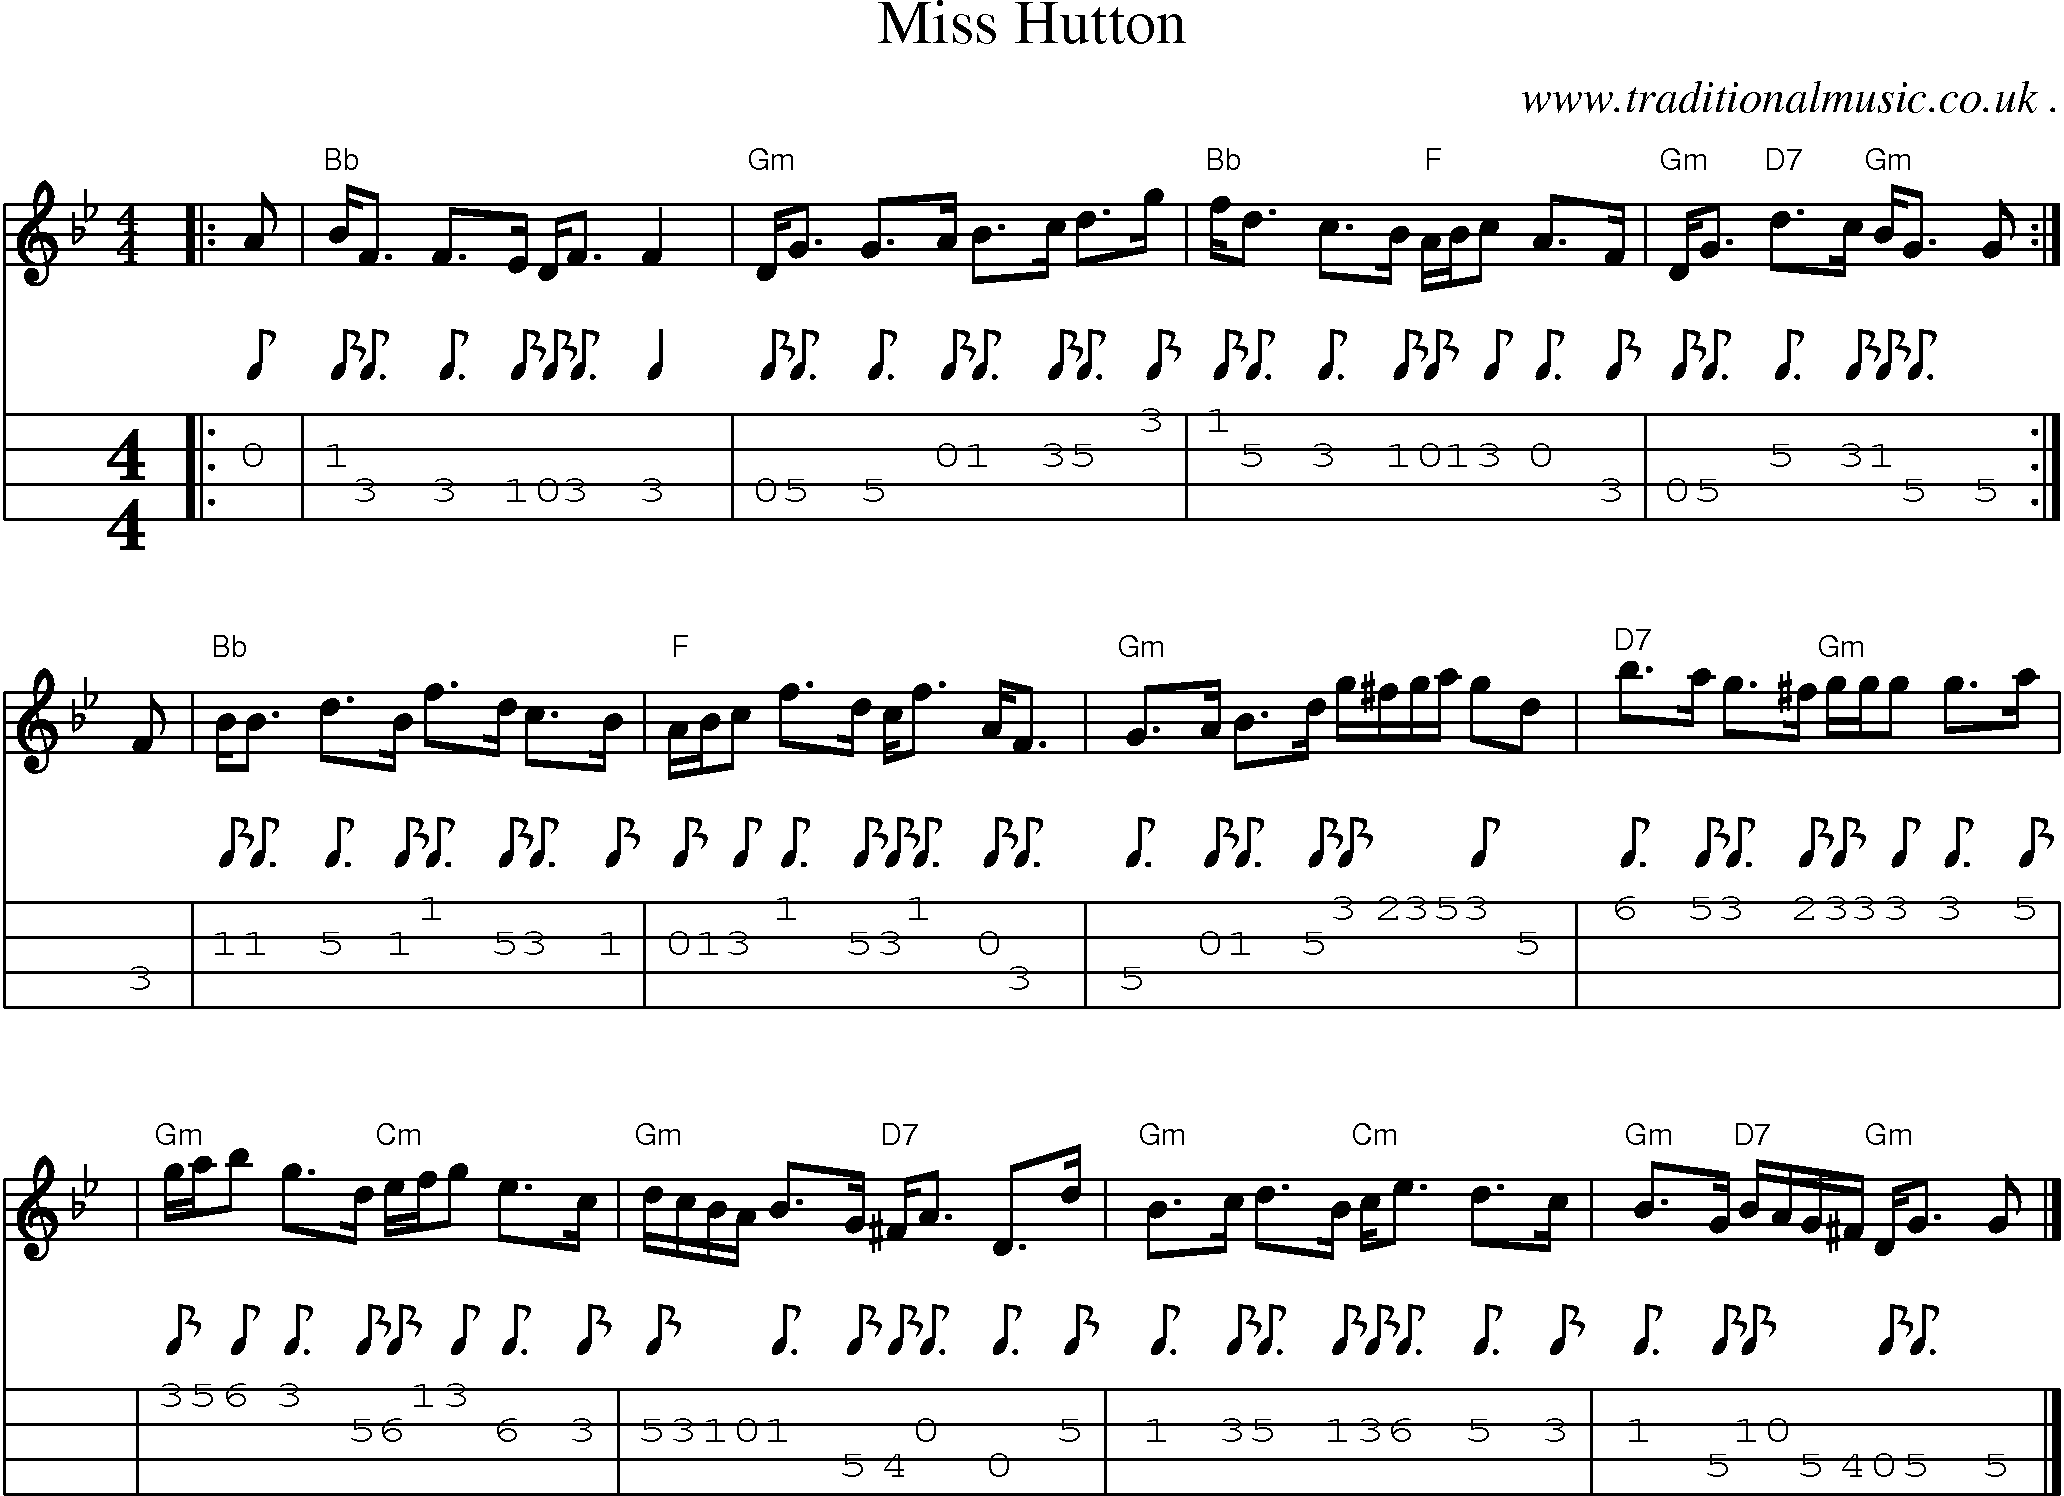 Sheet-music  score, Chords and Mandolin Tabs for Miss Hutton